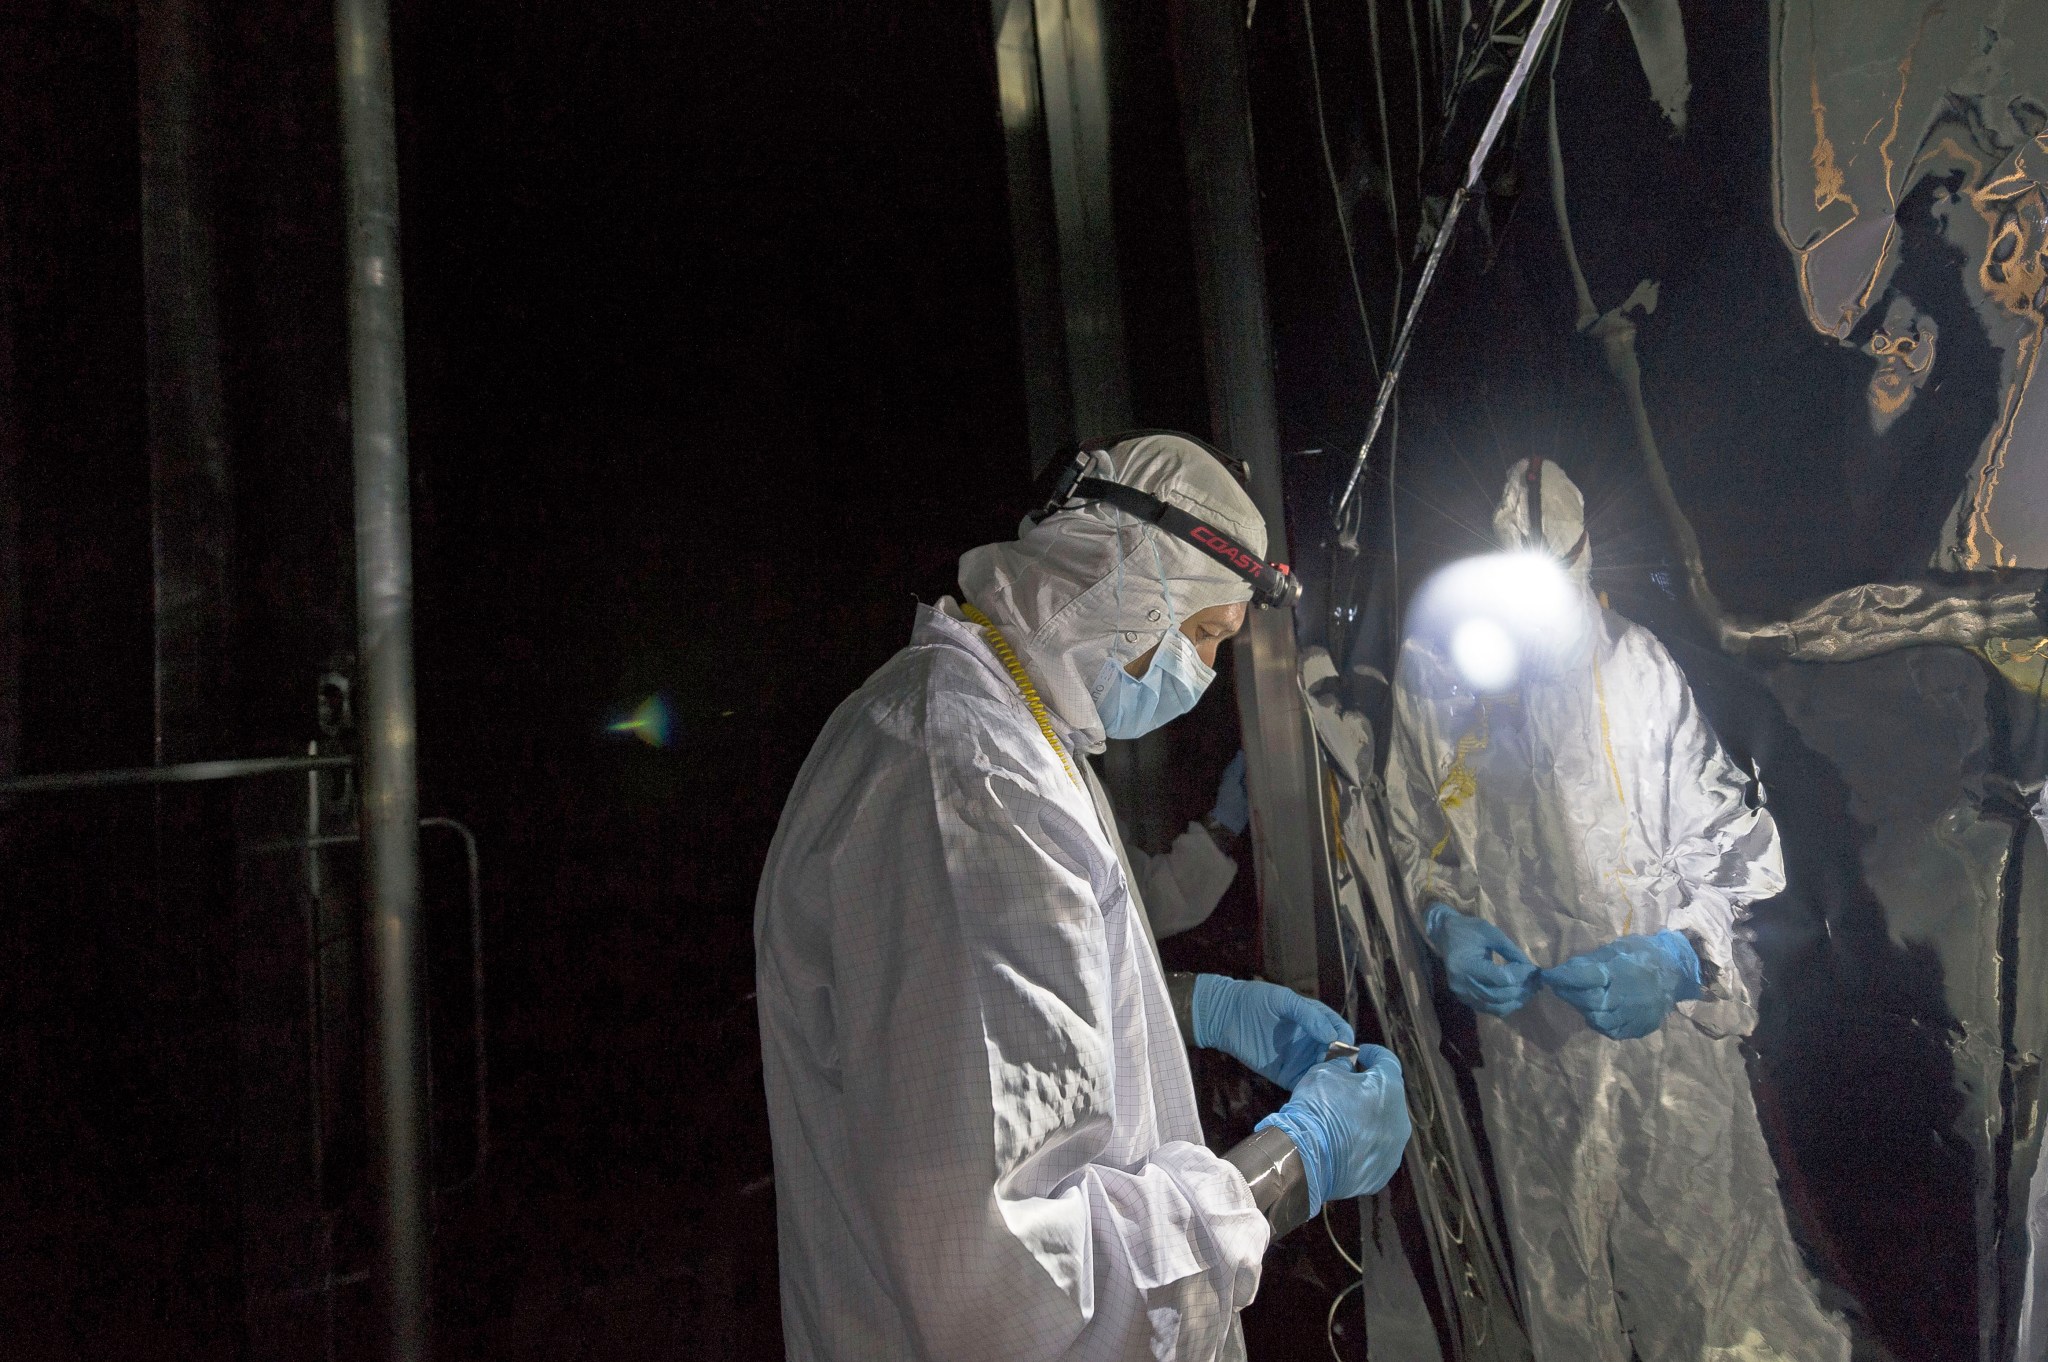 Eric Zoller, a technician from Harris Corporation, headquartered in Melbourne, Florida, checks the helium shroud in Chamber A at NASA’s Johnson Space Center.